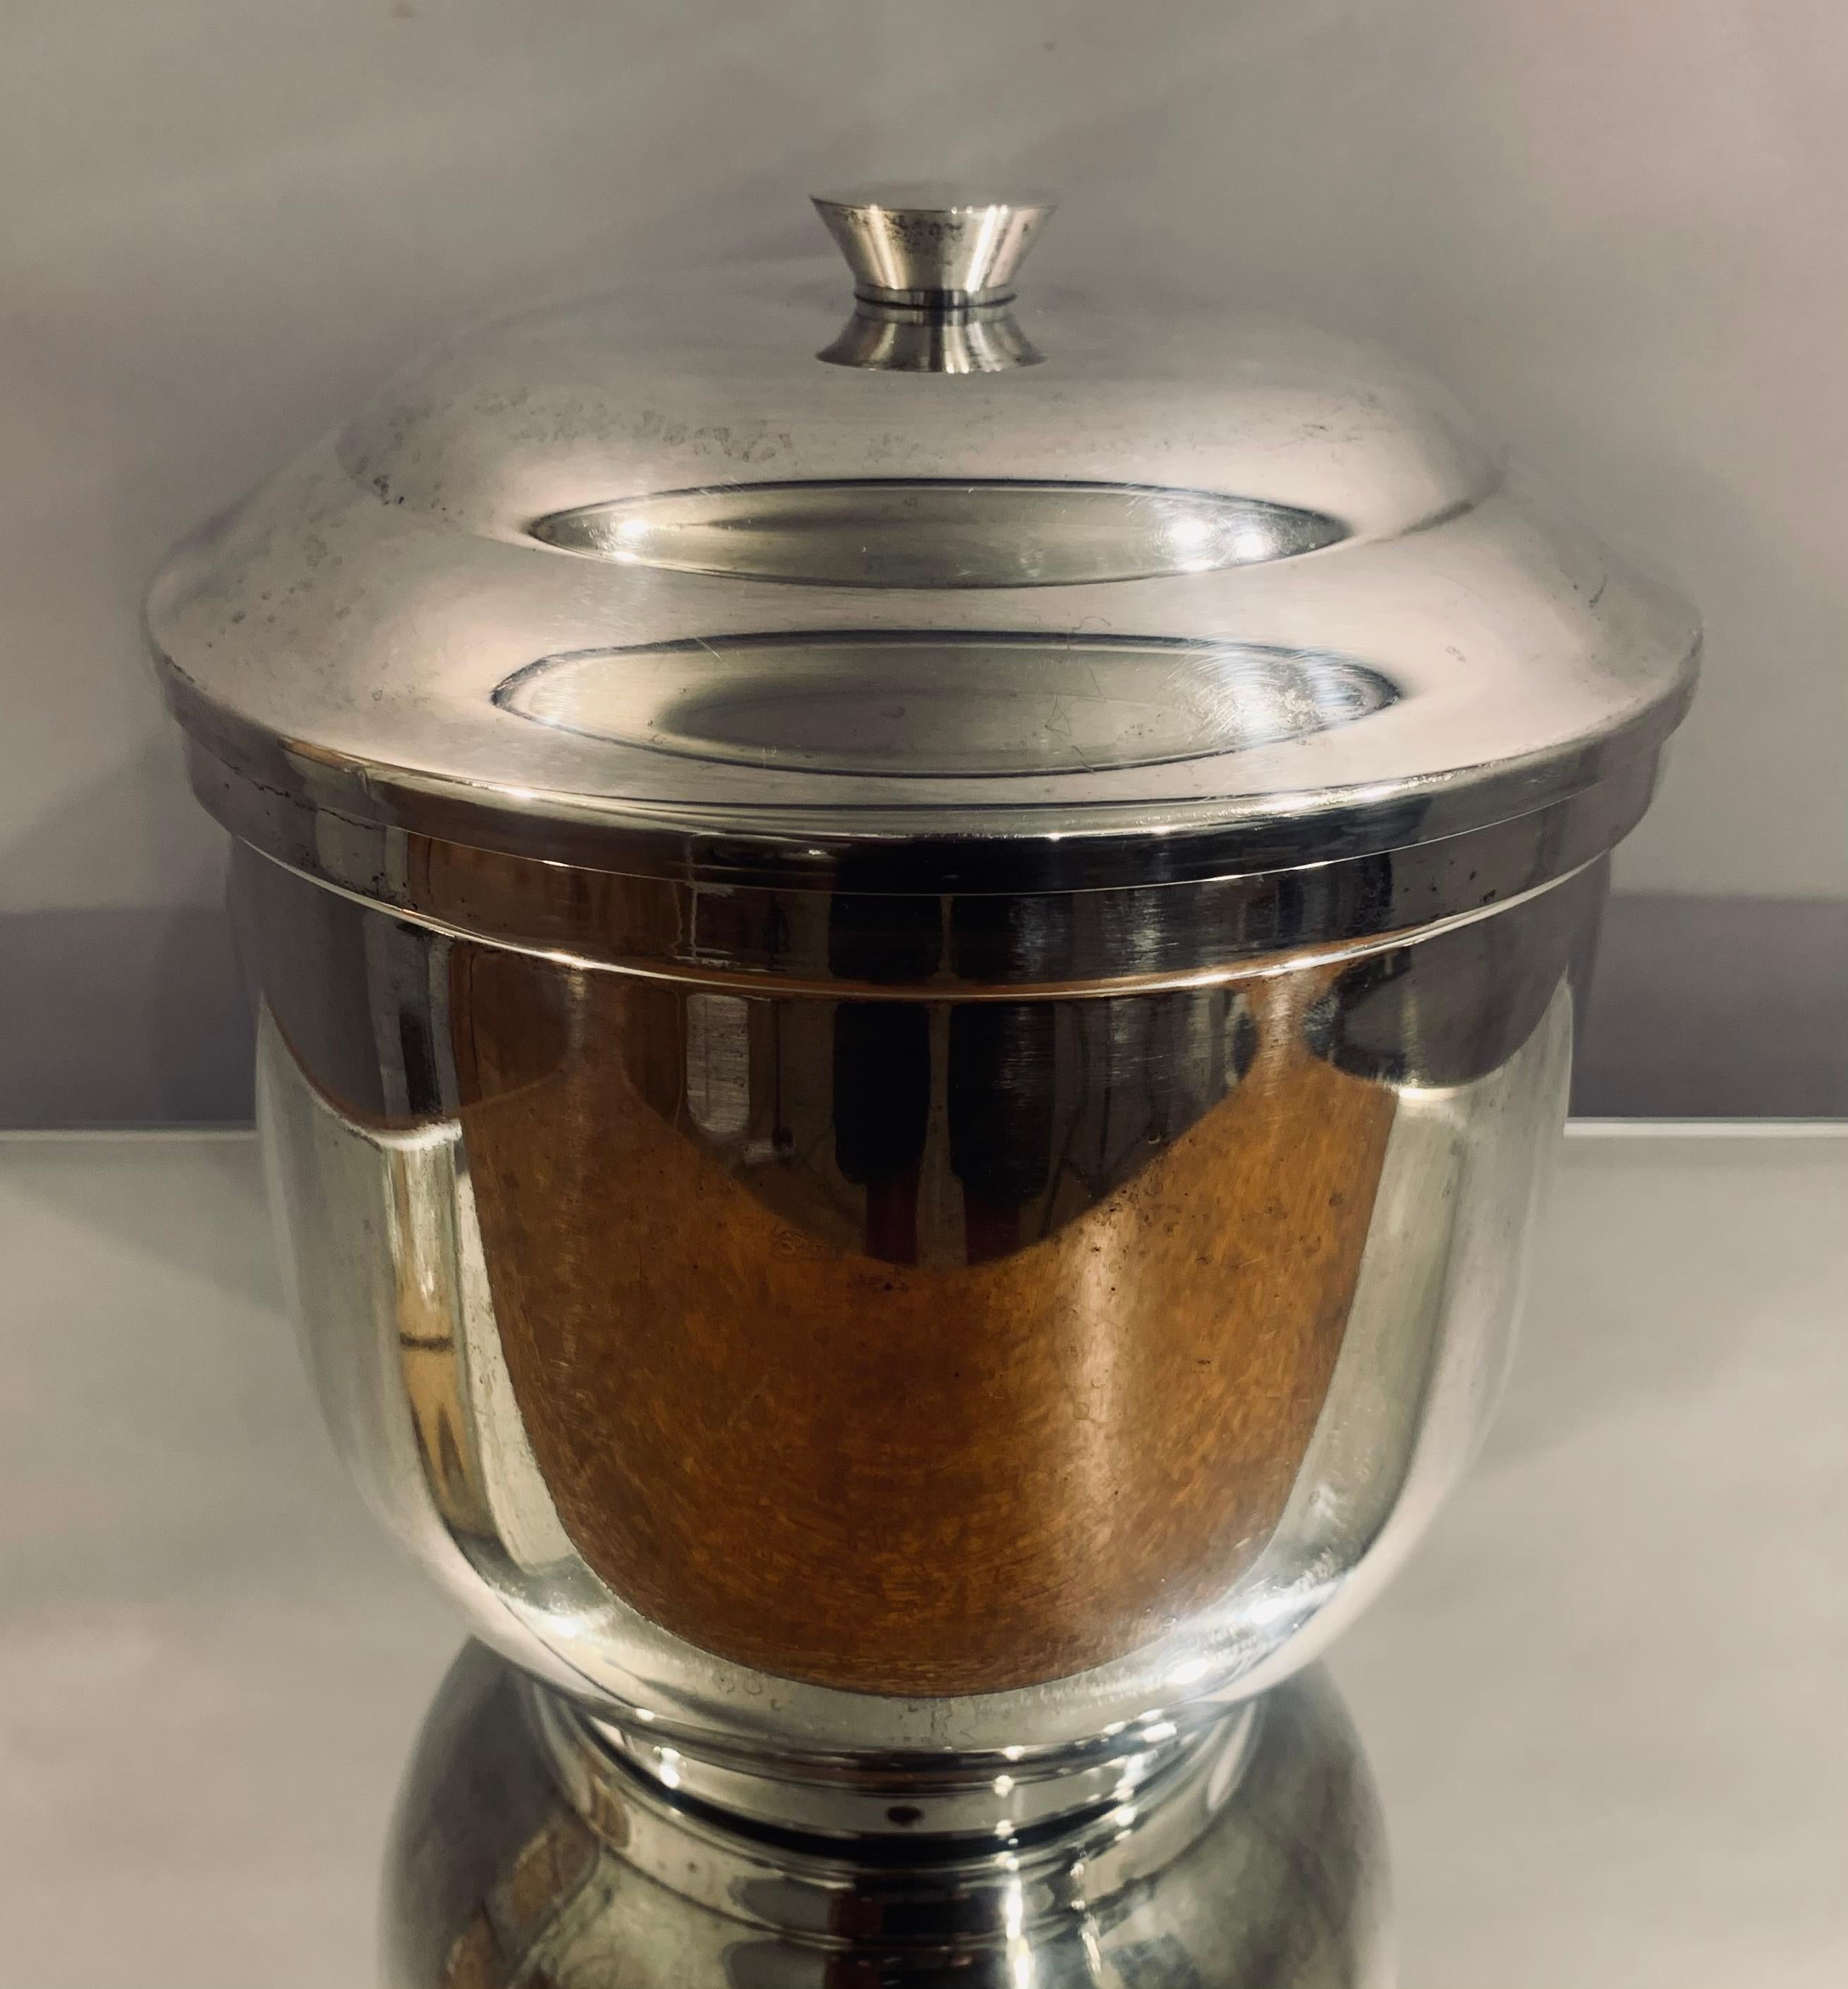 Vintage, circa 1950s, Italian silver-plated ice bucket with a white ceramic insert to hold the ice. The ceramic insert is held securely in place with a rubber air tight band around its circumference. Stamped on the base - Calegaro silver plated. The